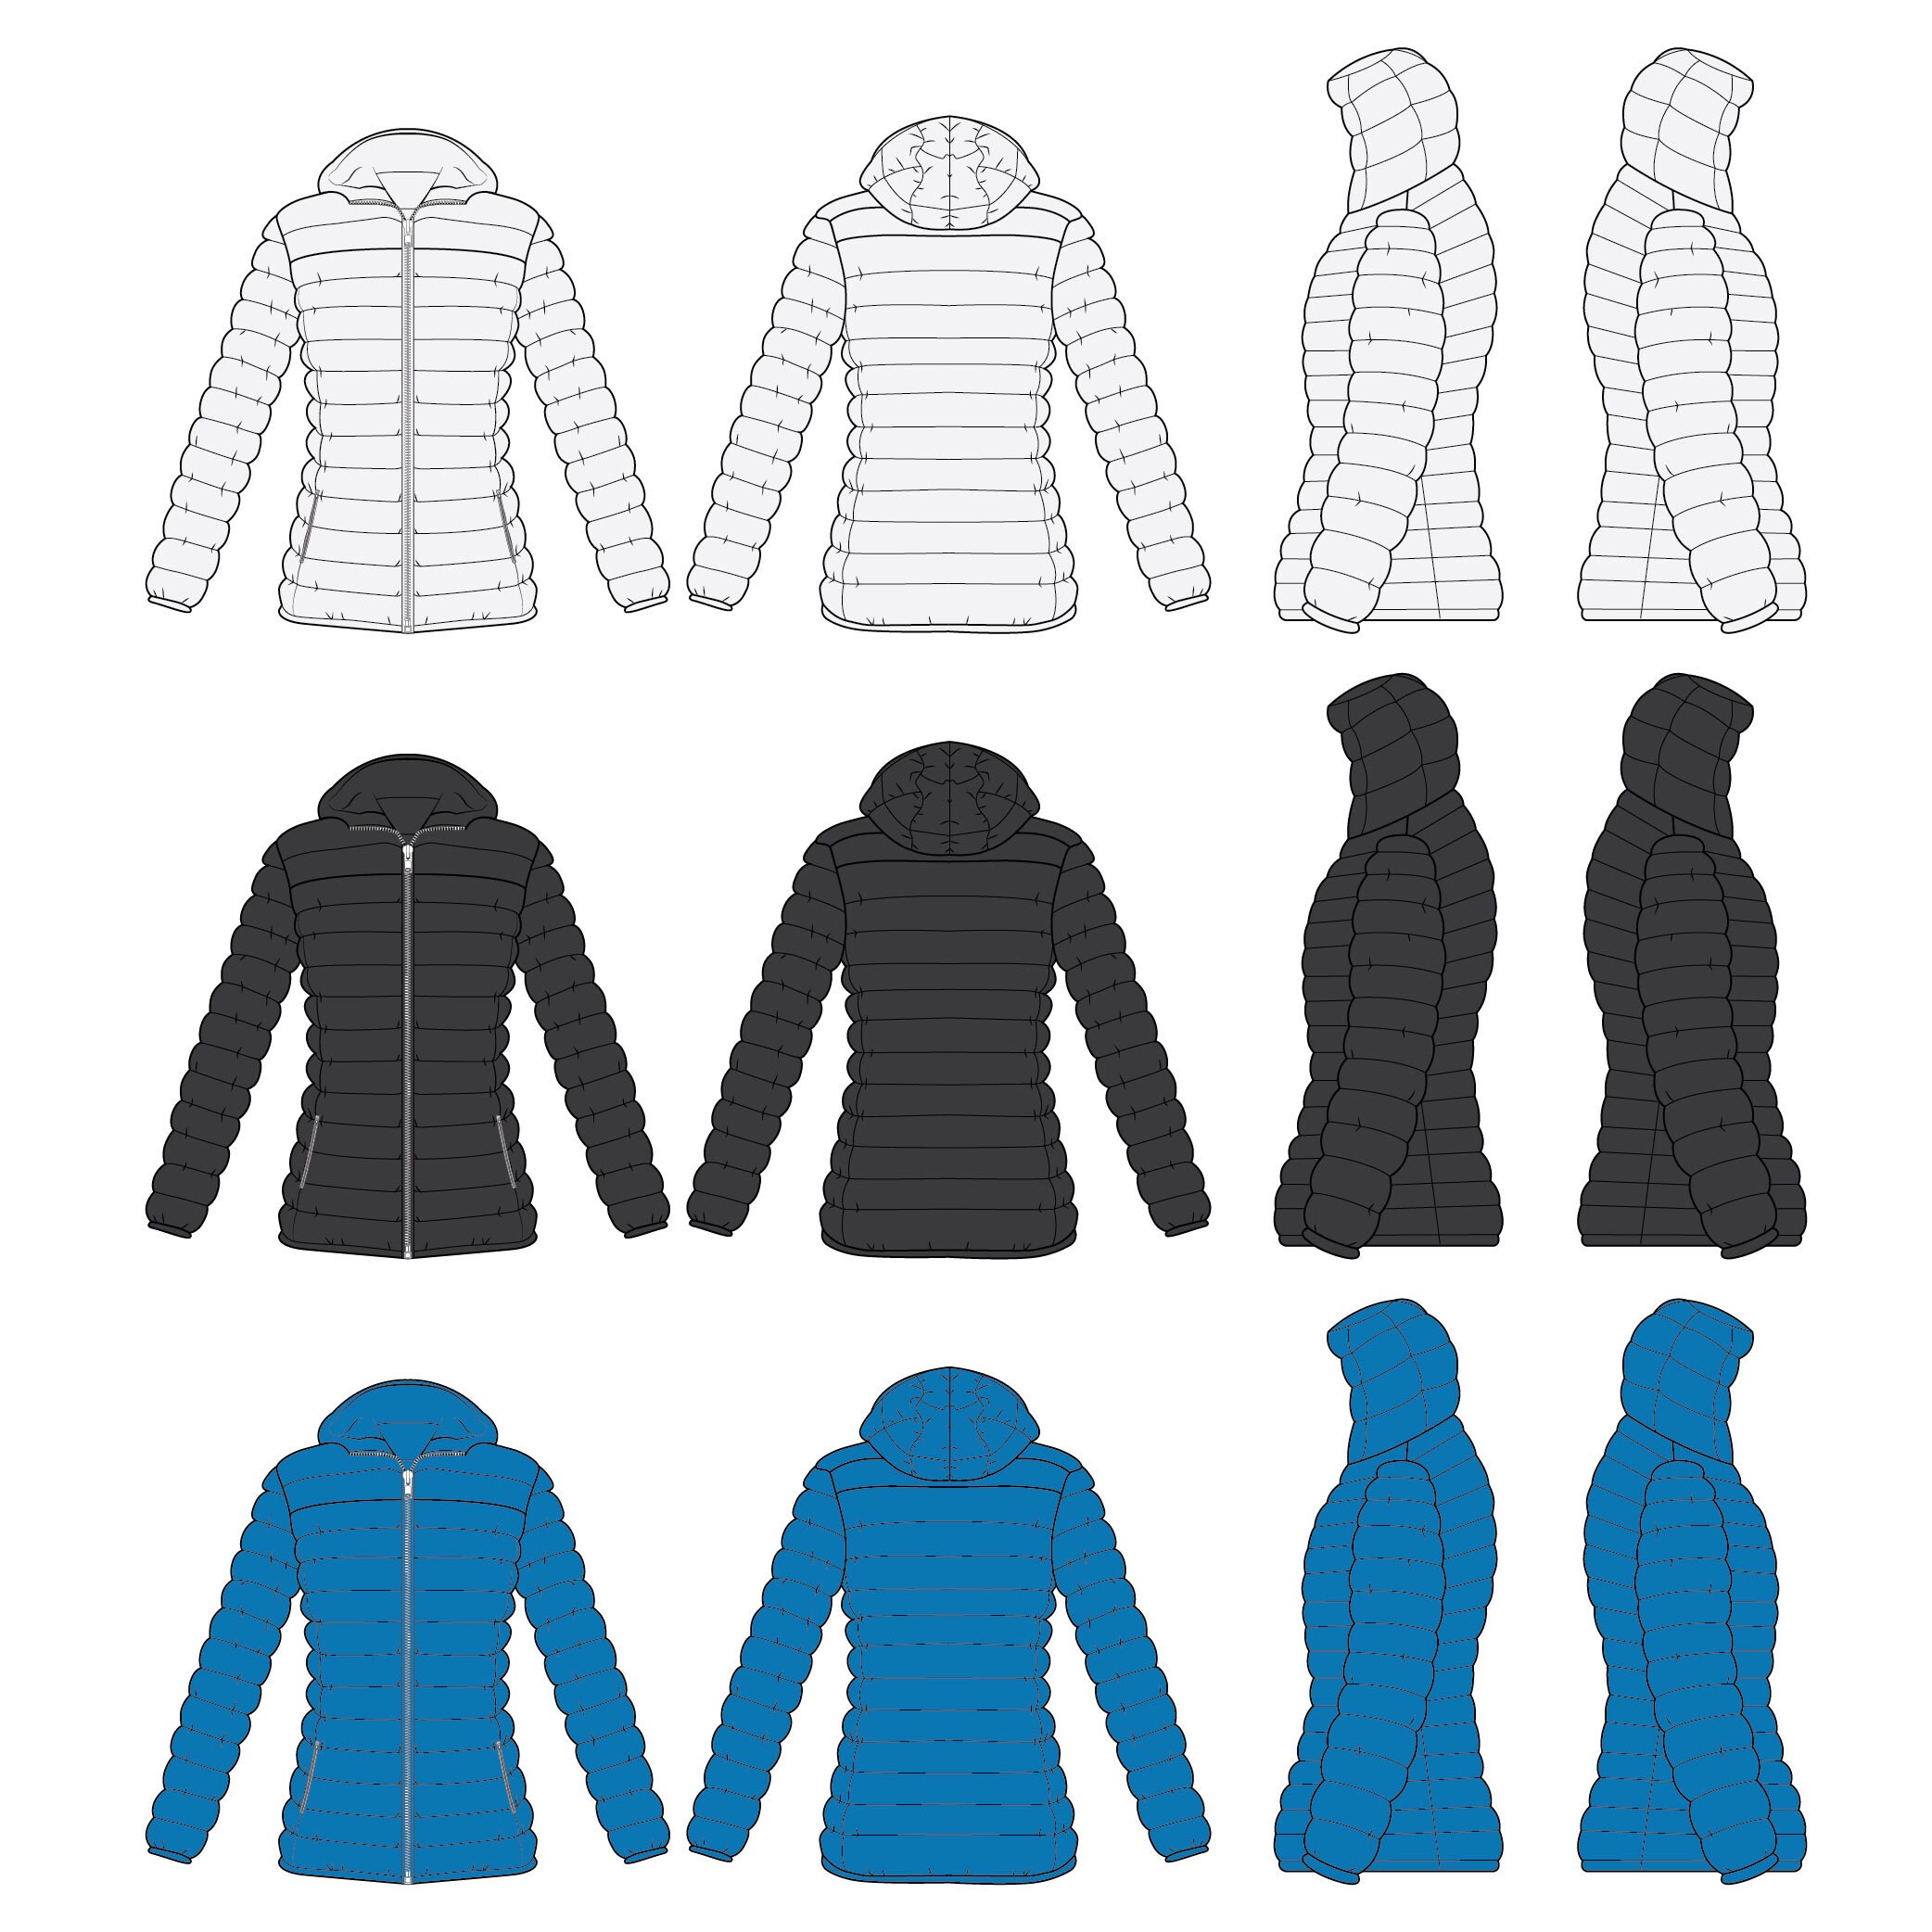 Puffer Coat Flat Illustrator Sketch -   Flat drawings, Technical  drawing, Drawing clothes